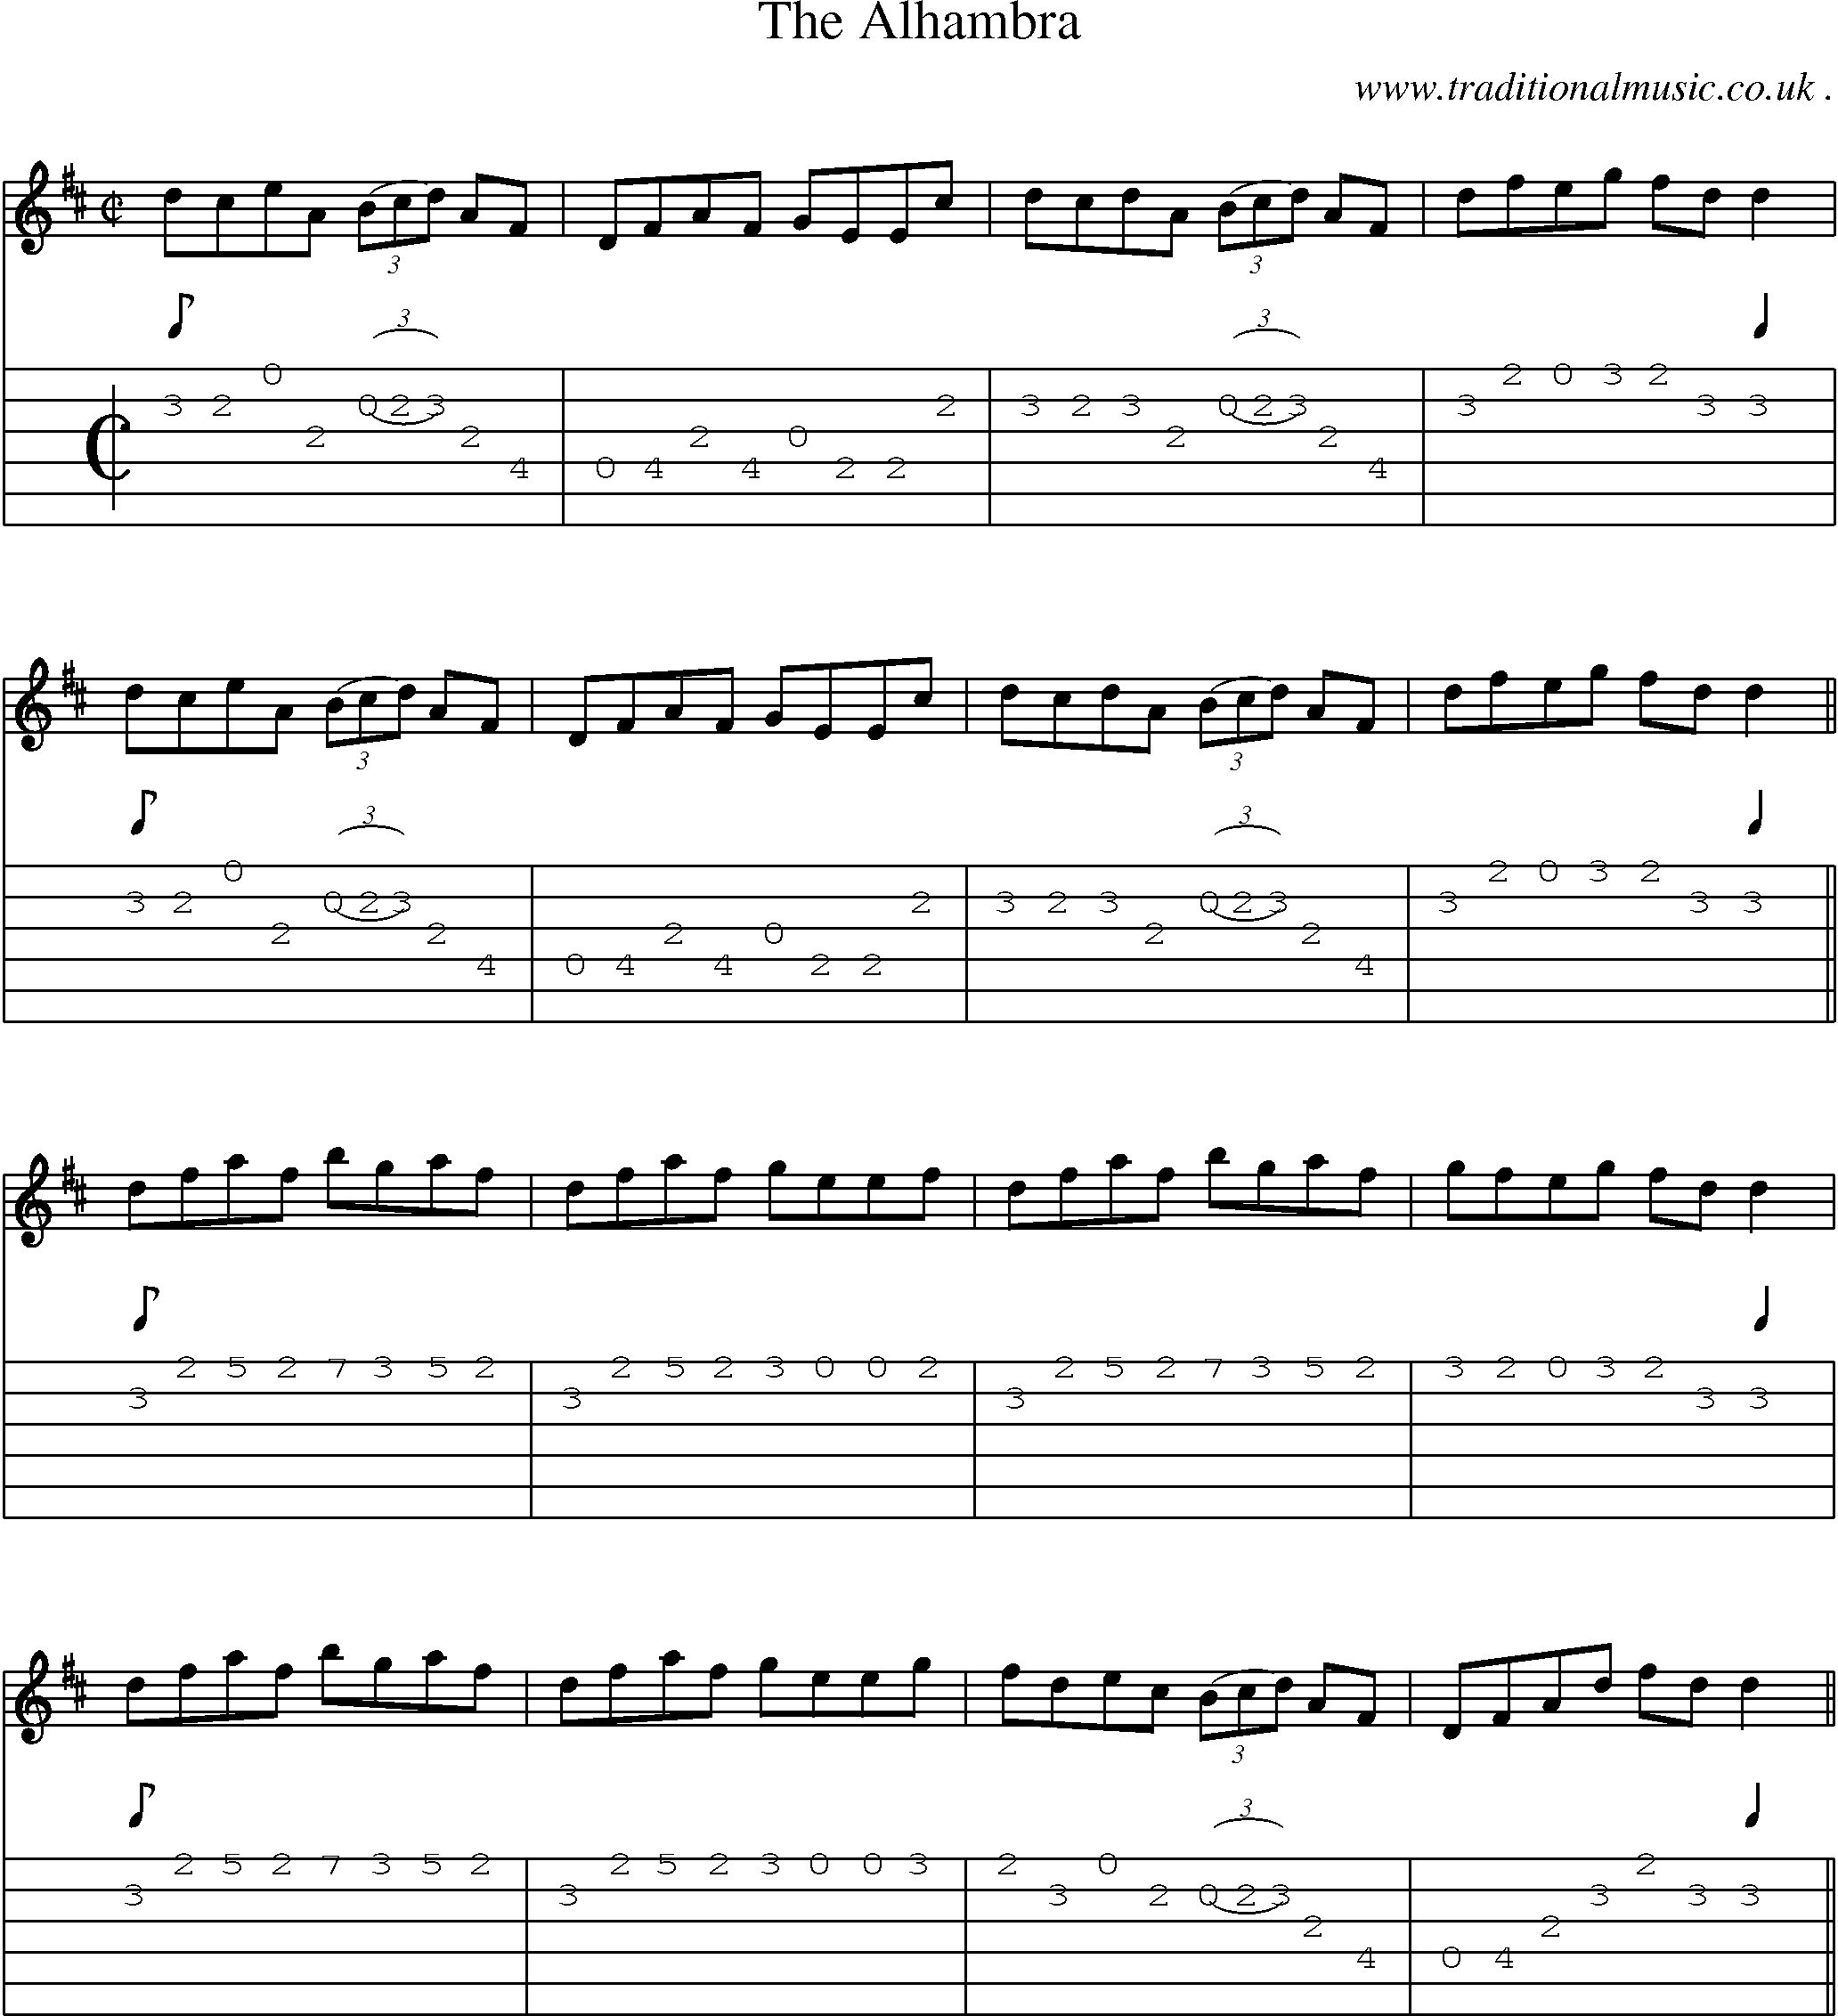 Sheet-Music and Guitar Tabs for The Alhambra